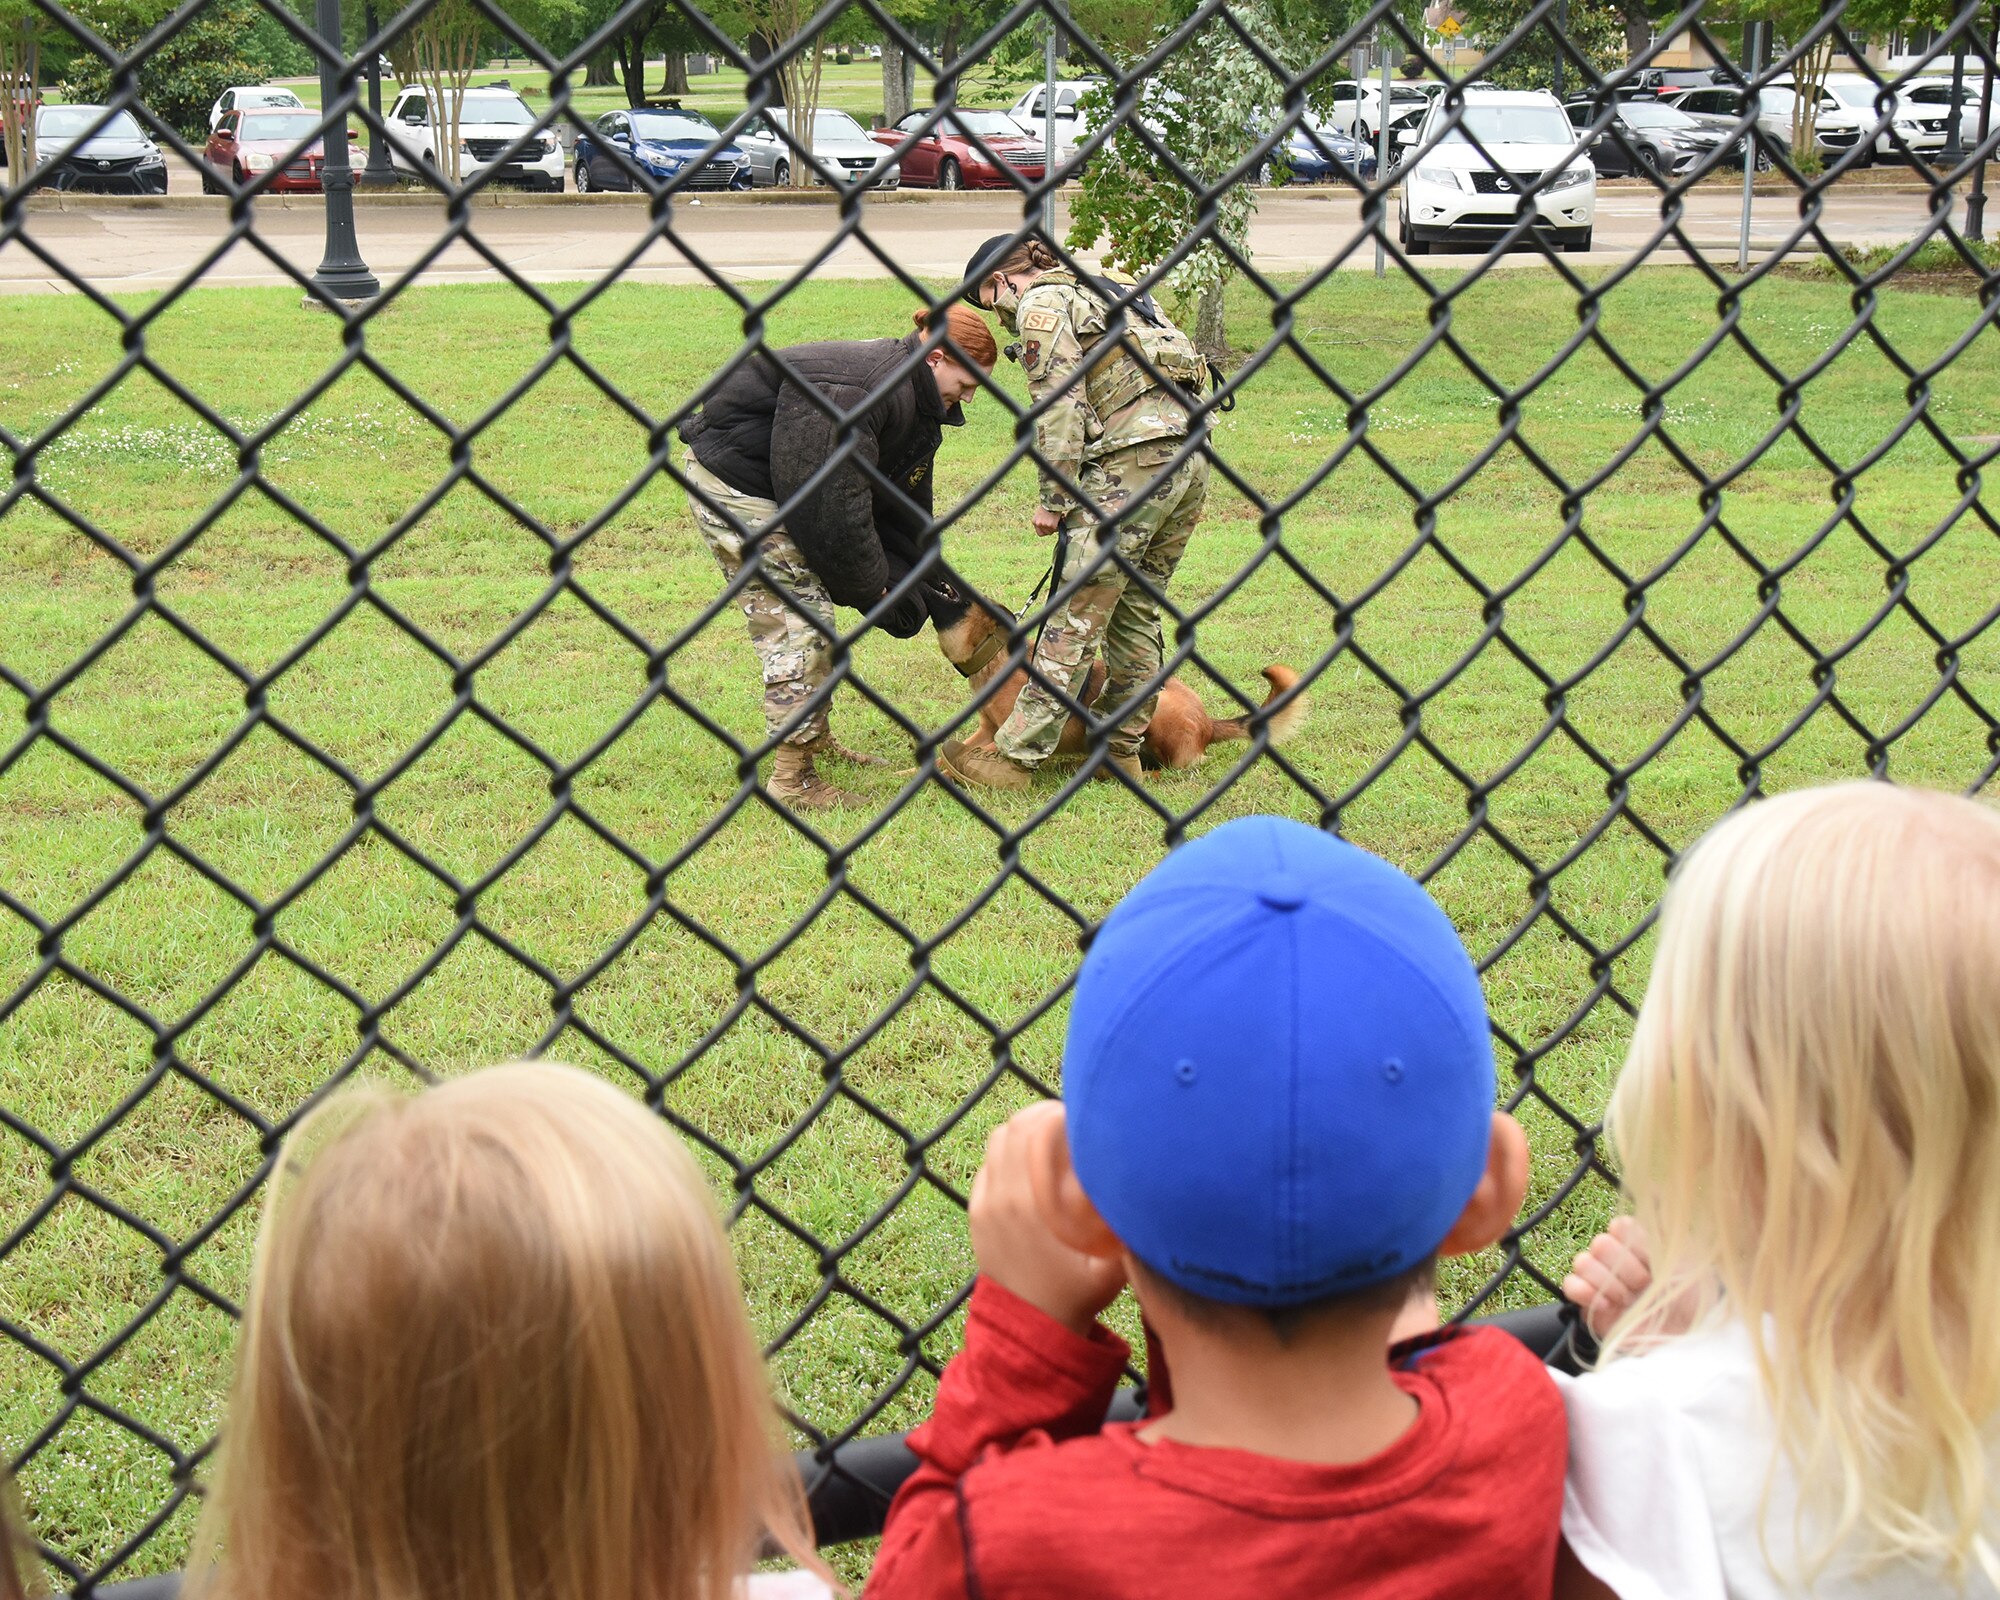 Children at the Child Development Center watch as Dixi, military working dog, and her handler showcase their skills, May 11, 2021, on Columbus Air Force Base, Mississippi. Working dogs are able to detect the scent of explosives, allowing for a more accurate and quick search of an area. (U.S. Air Force photo by Elizabeth Owens)